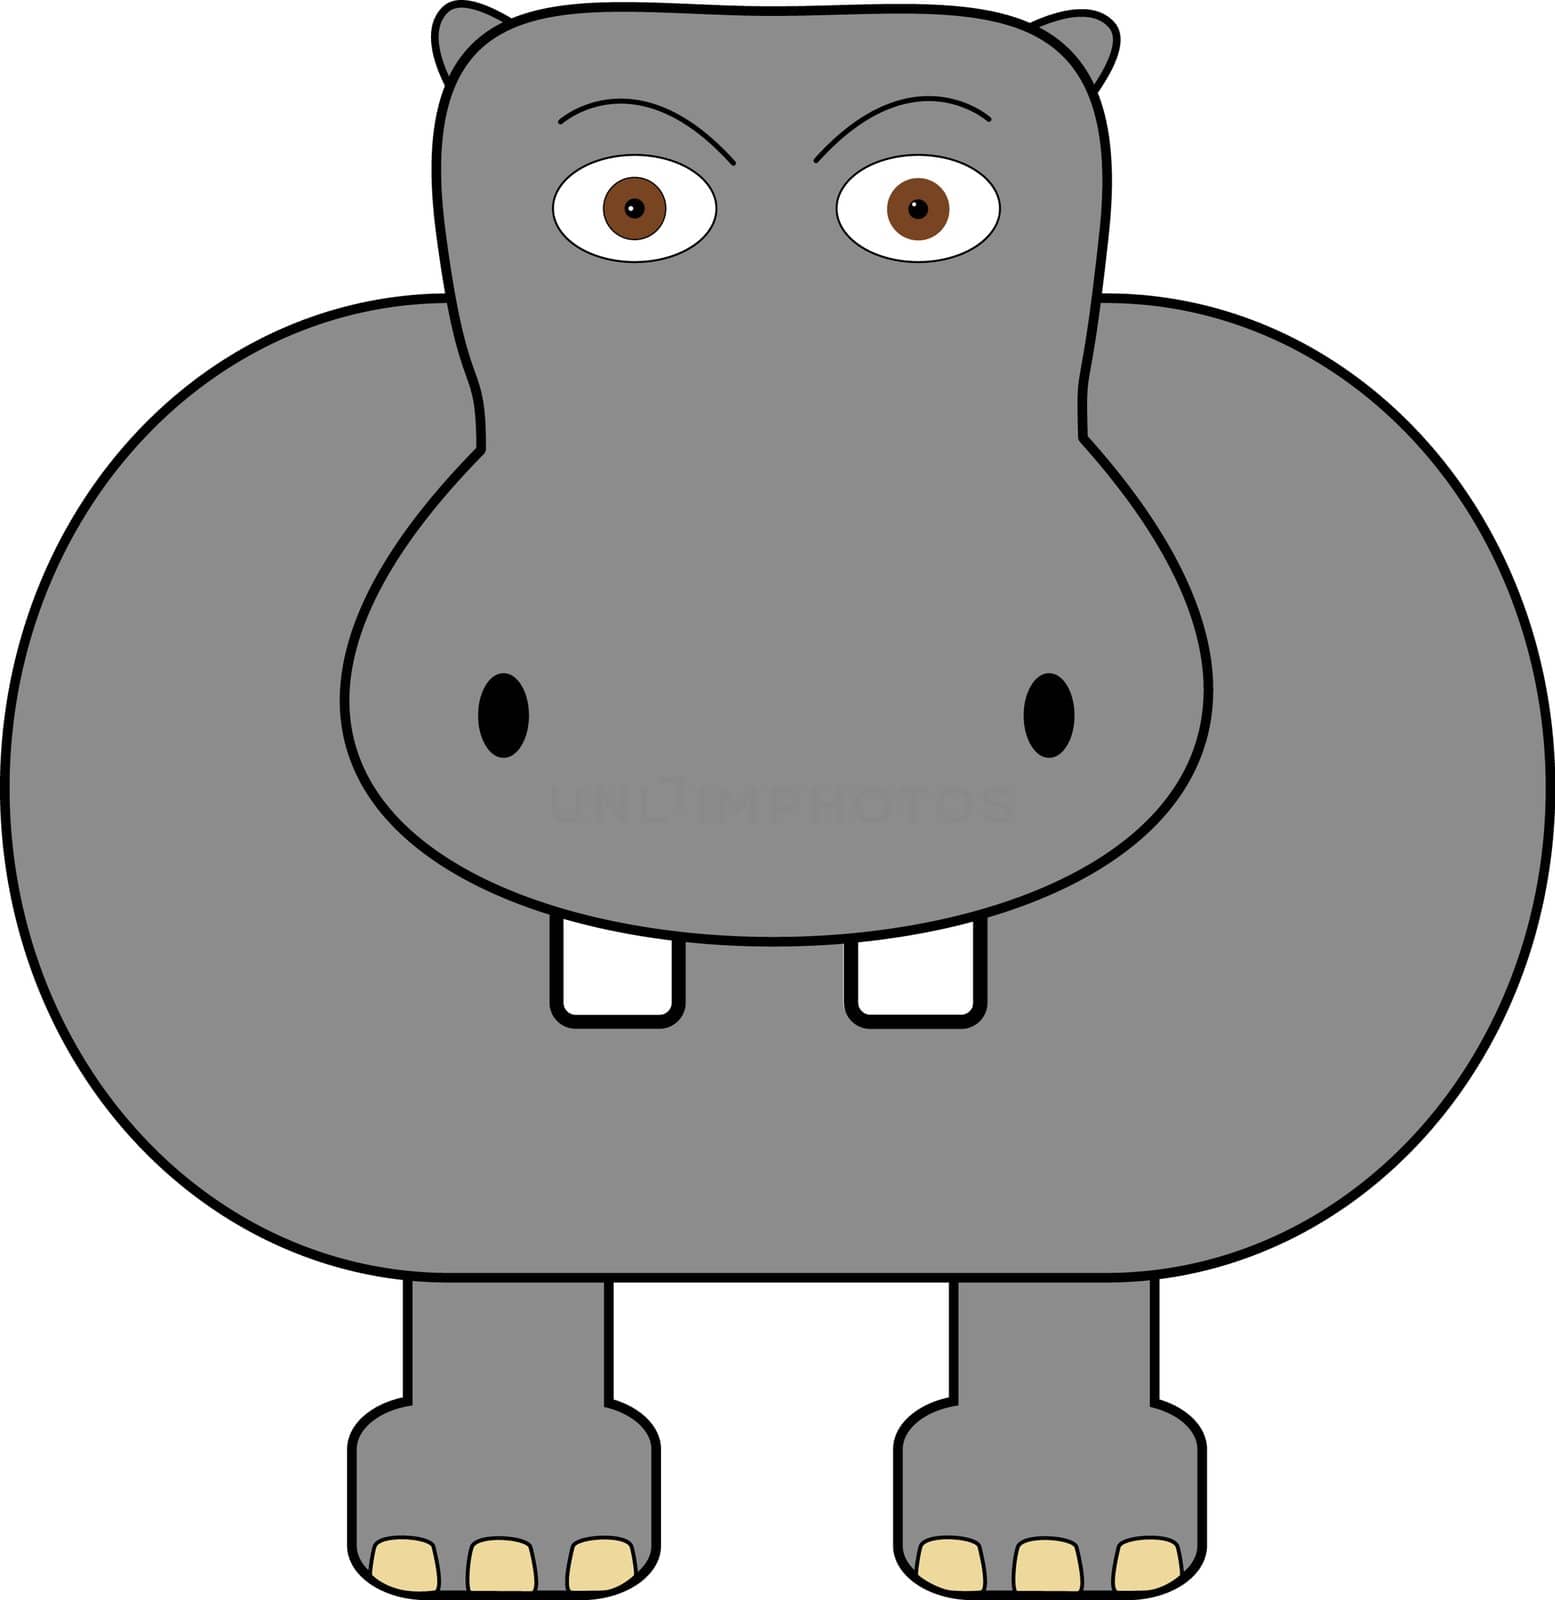 A vector hippo on a plain white background